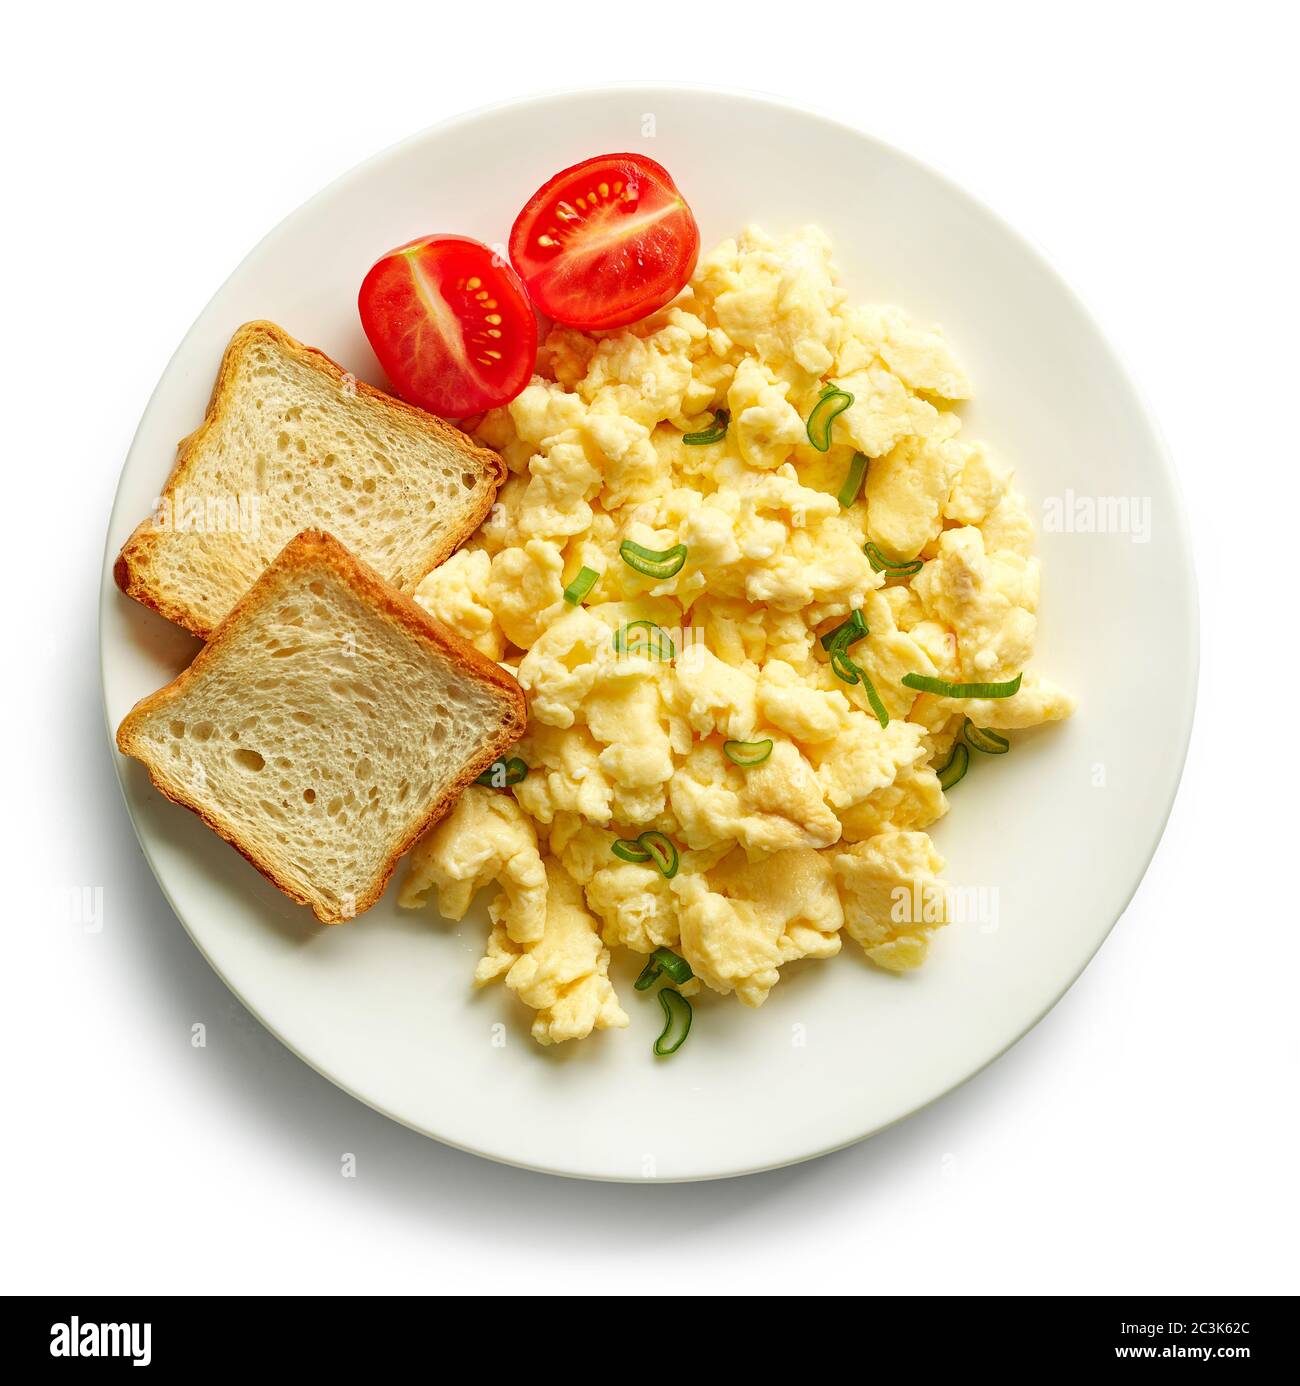 Plate Of Scrambled Eggs Isolated On White Background Top View Stock Photo Alamy